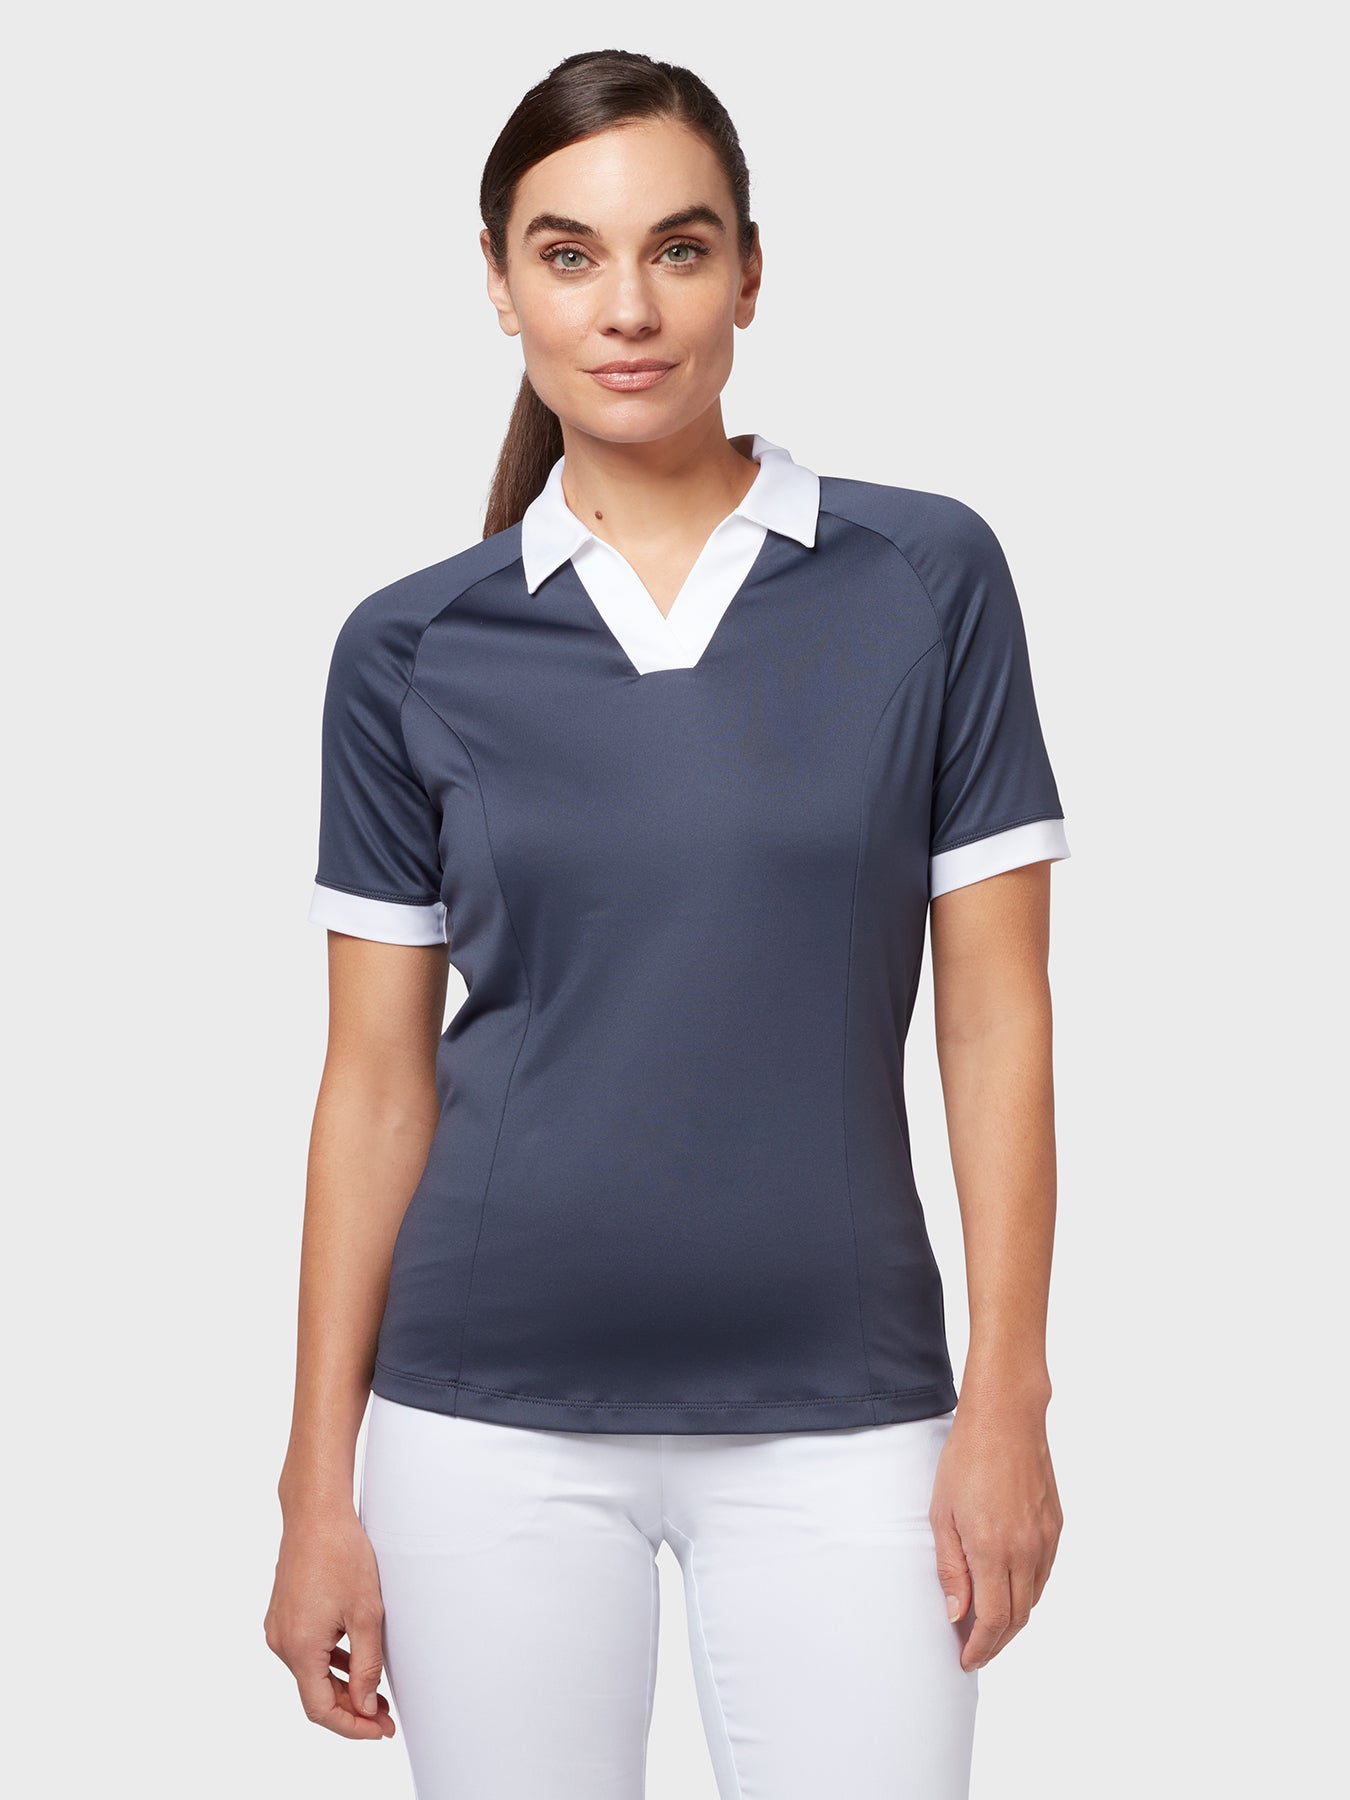 View VPlacket Colourblock Womens Polo In Odyssey Gray Odyssey Gray L information